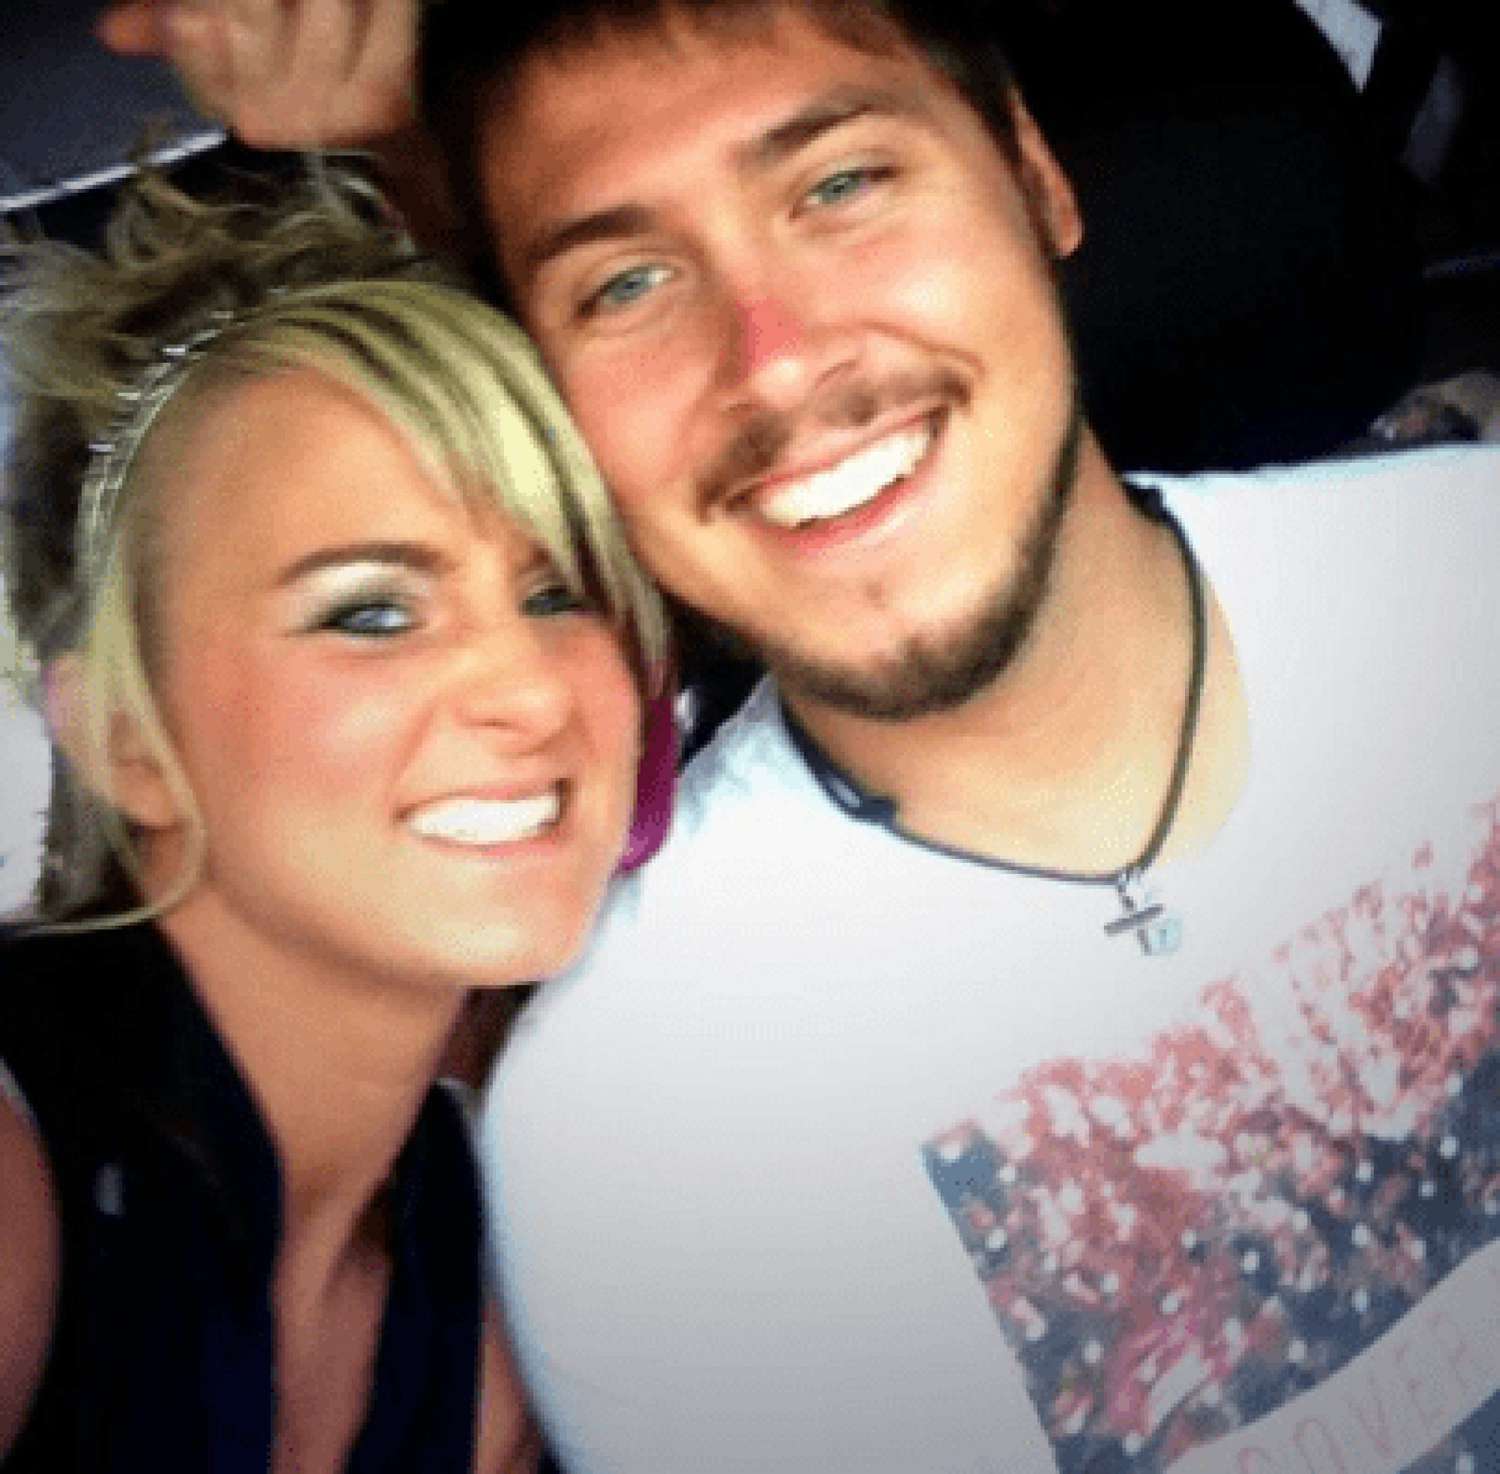 Teen Mom 2's Leah Messer Reveals She Had Sex with Ex Jeremy Calvert Again | PEOPLE.com